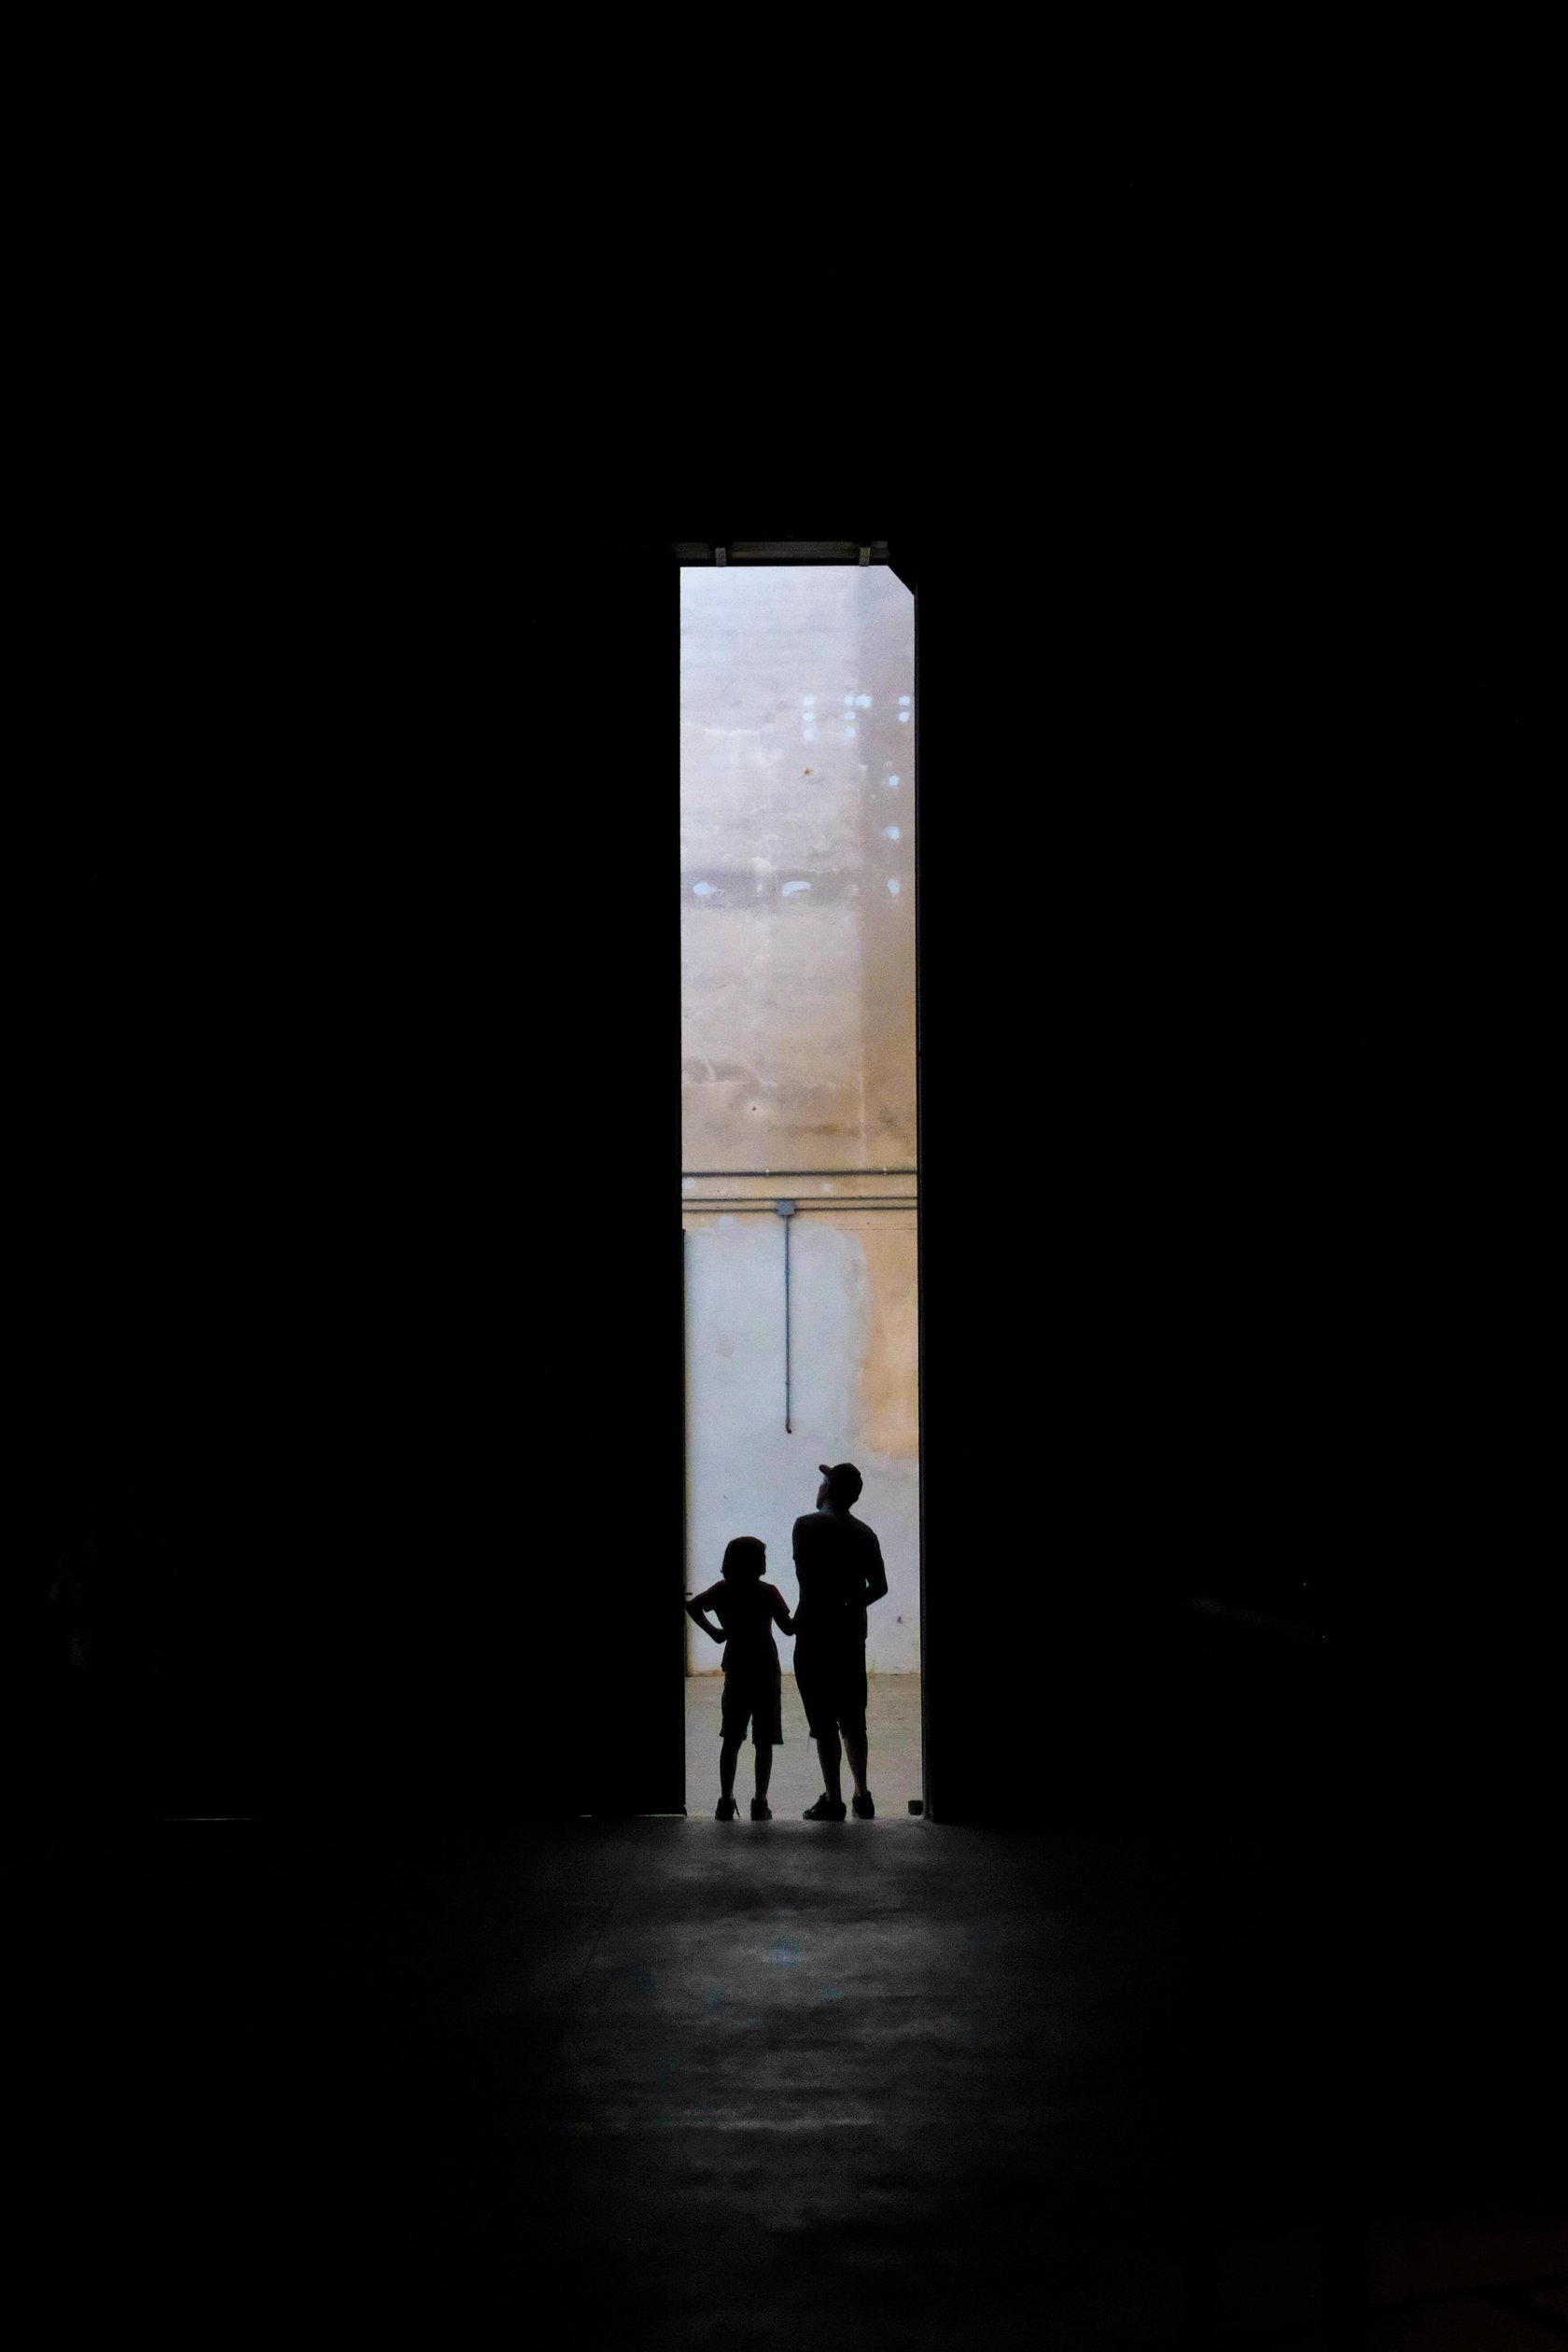 Silhouette Photography: The Art of Capturing Cool Silhouettes